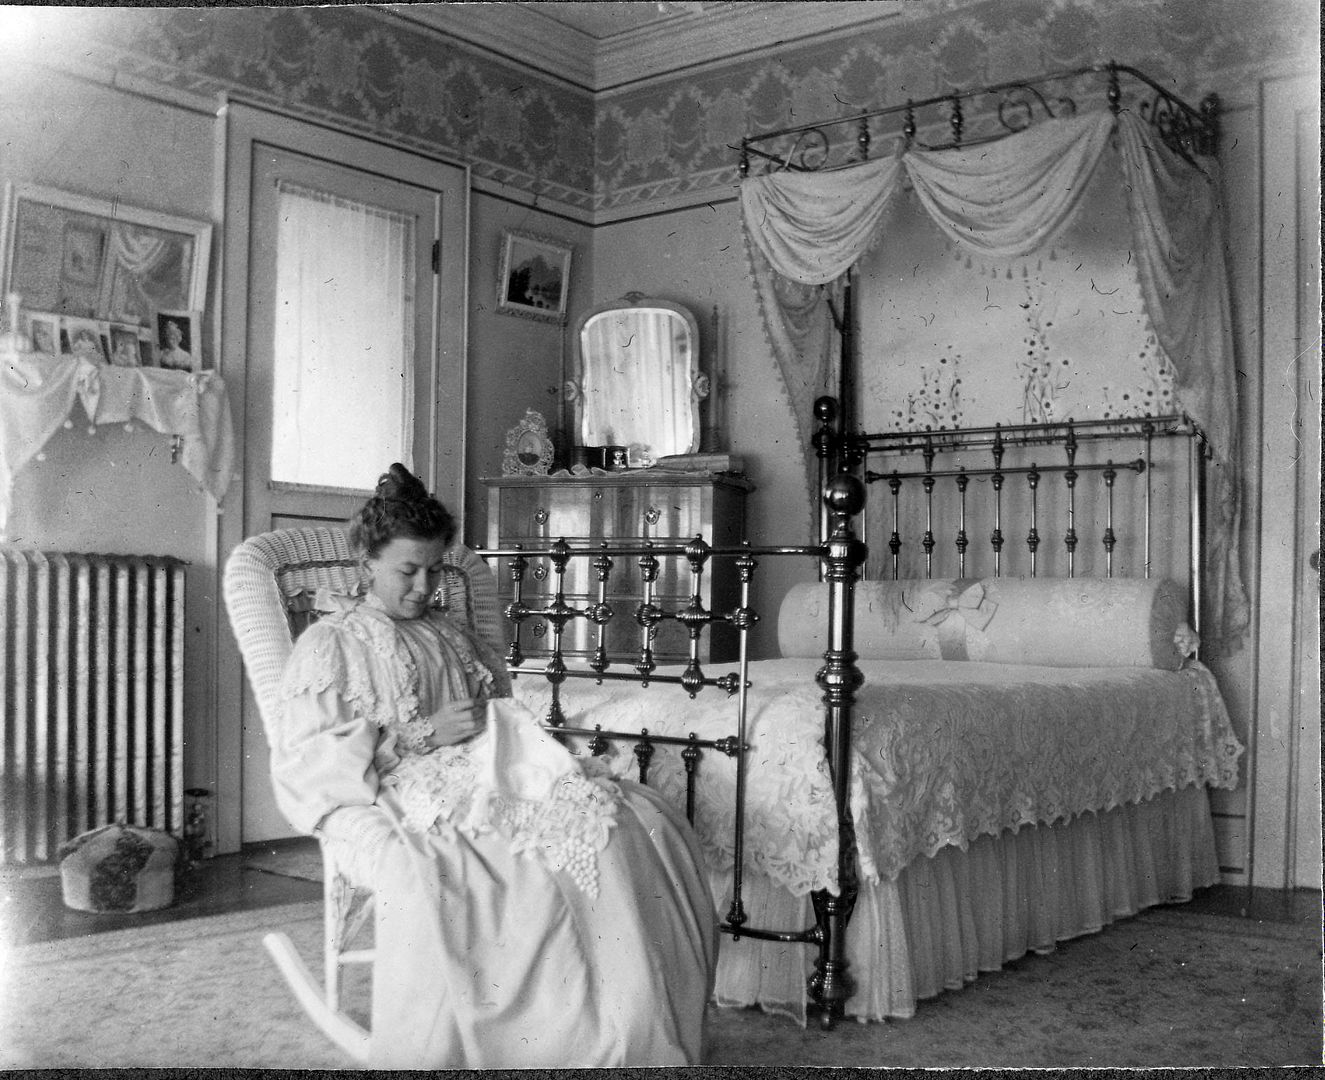 A photo of Addie in her bedroom at the Fargo Mansion (Lake Mills) in the late 1890s.